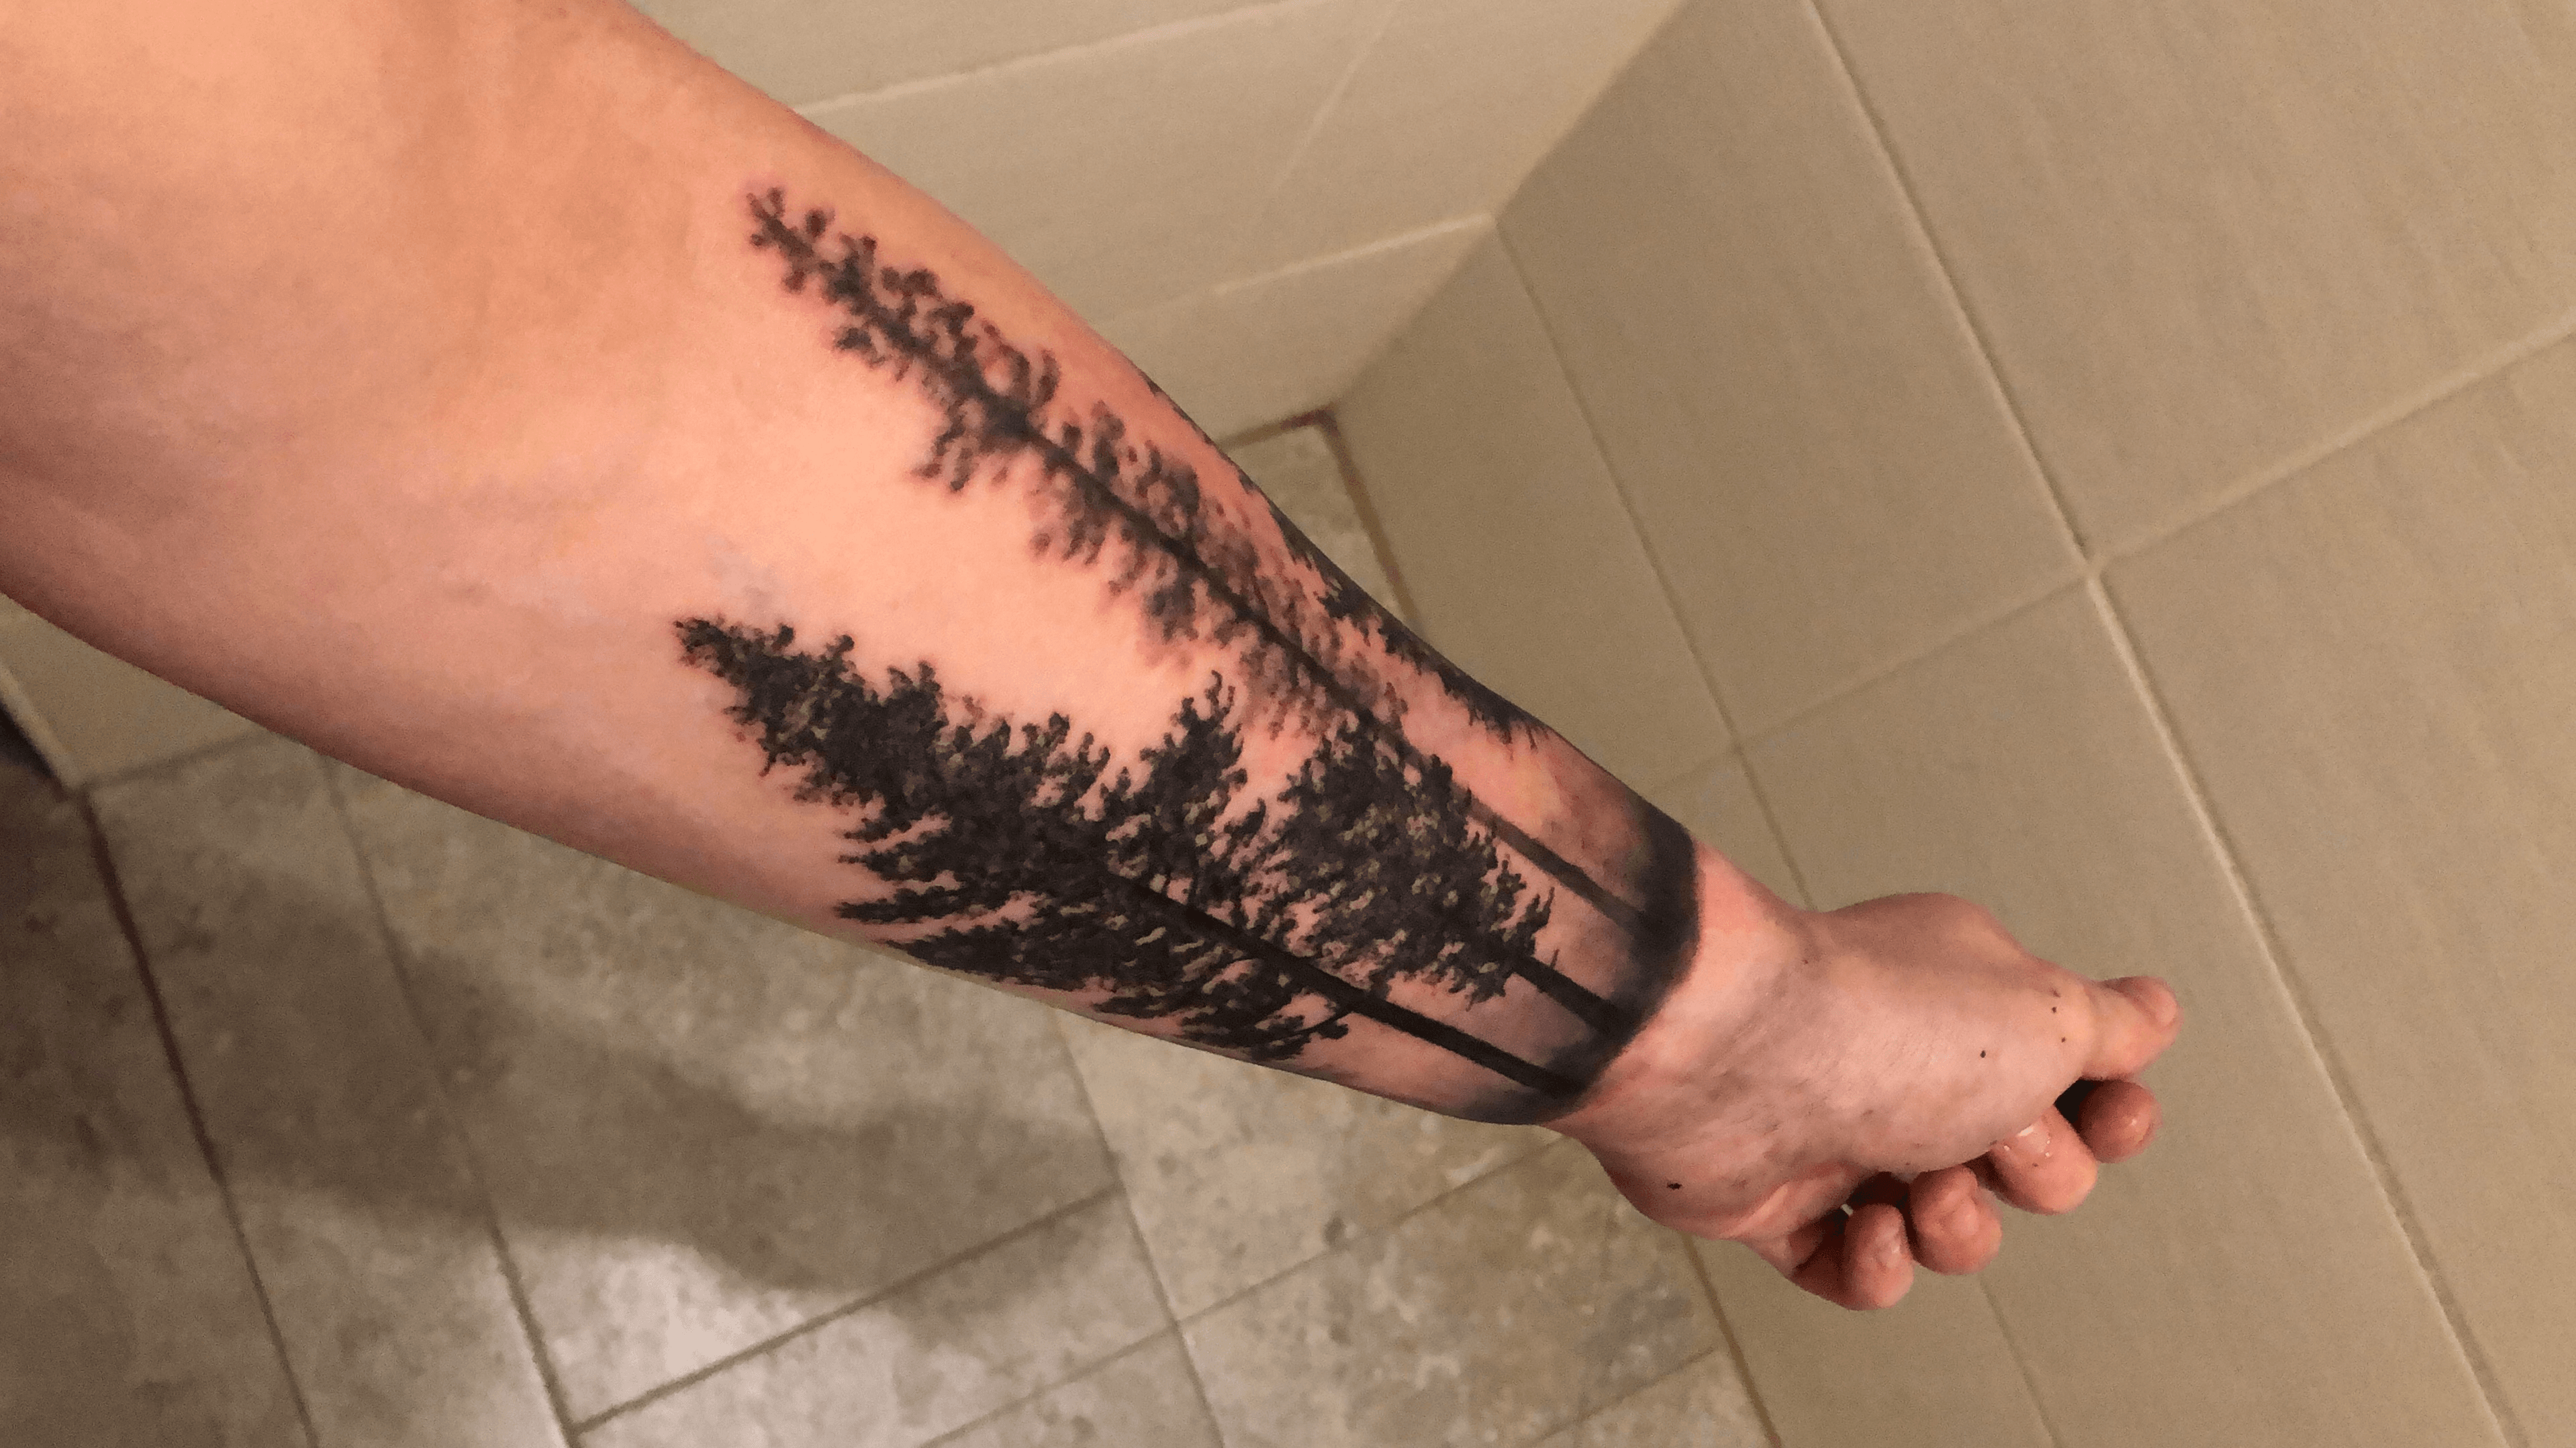 Tree Tattoos for Men  Ideas and Designs for guys